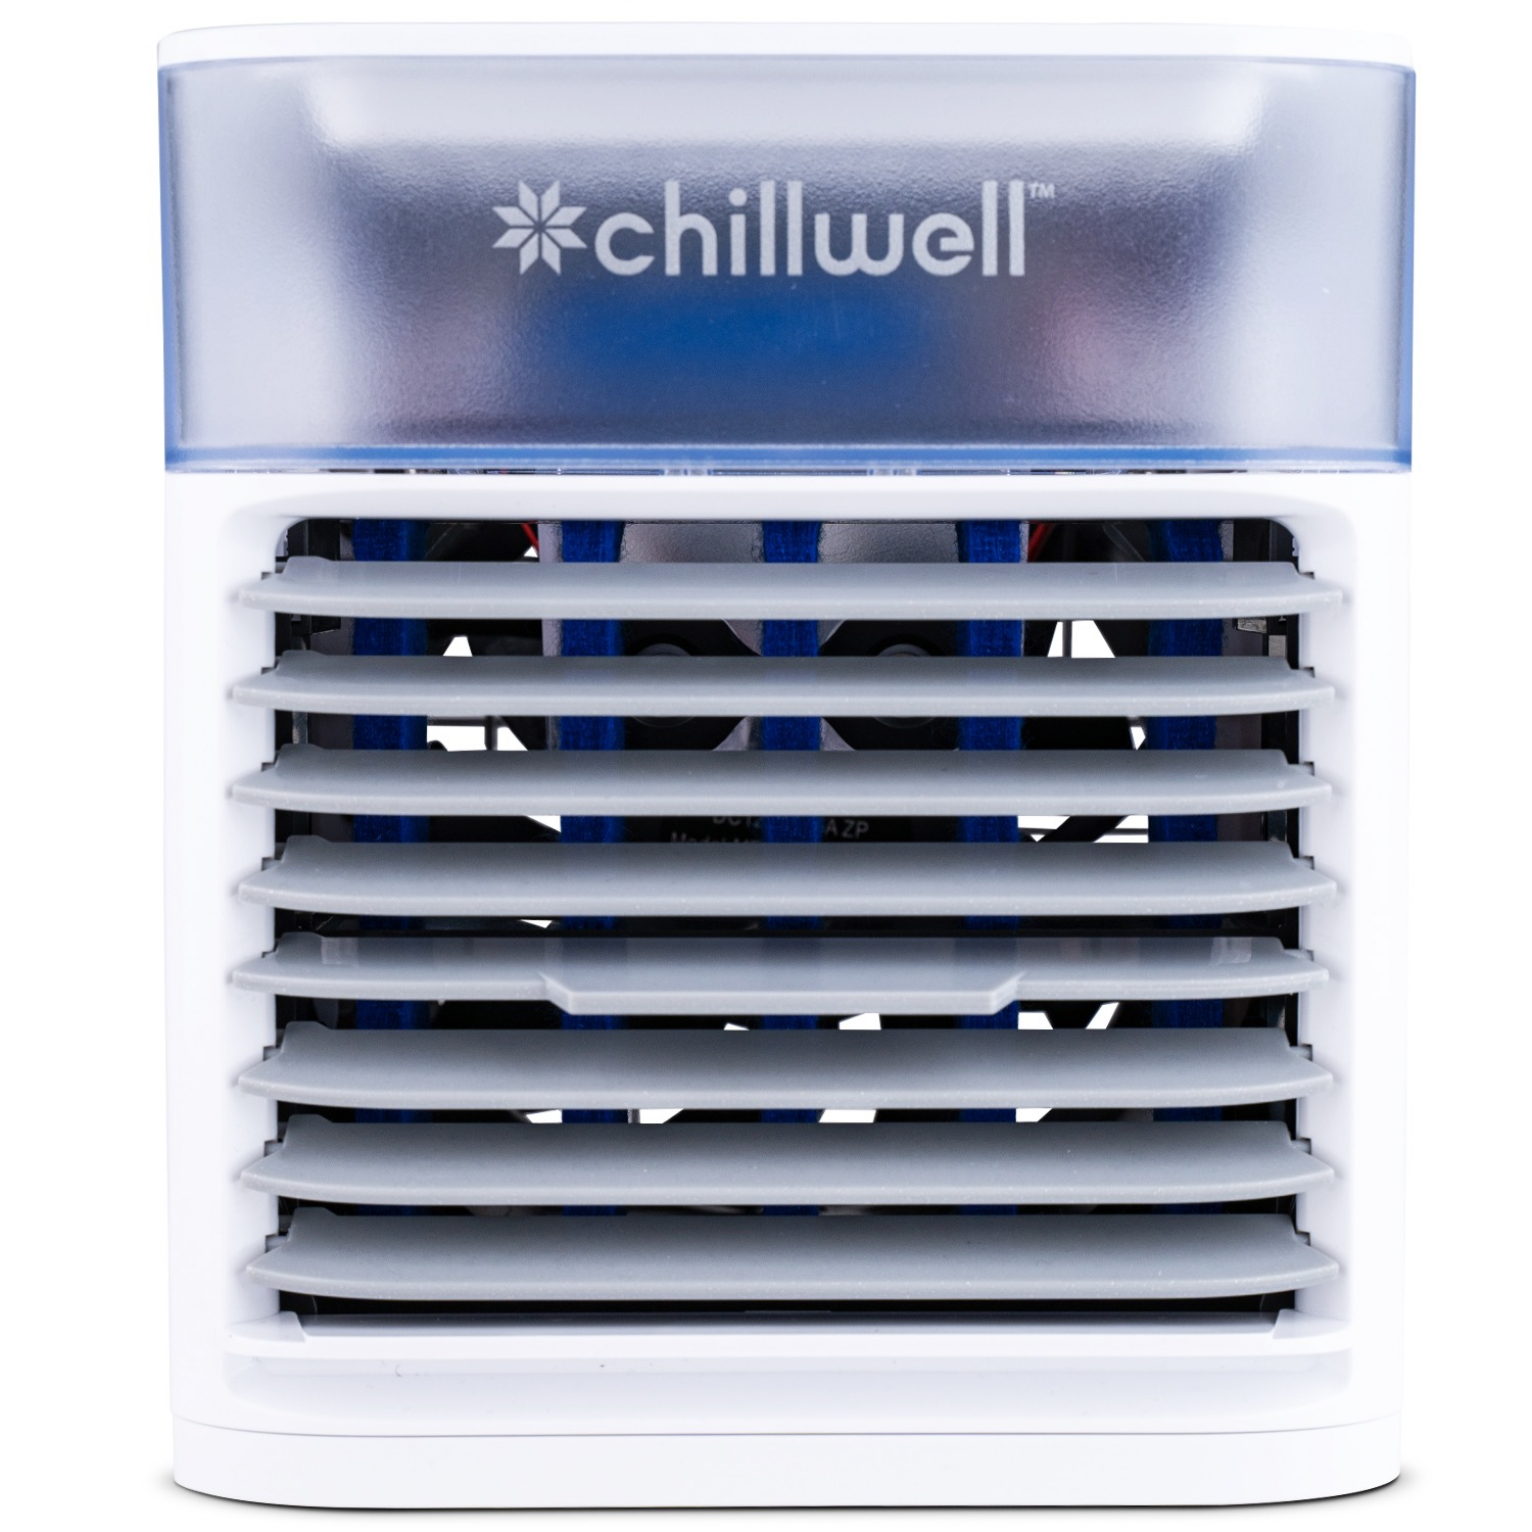 Chillwell AC Free Delivery